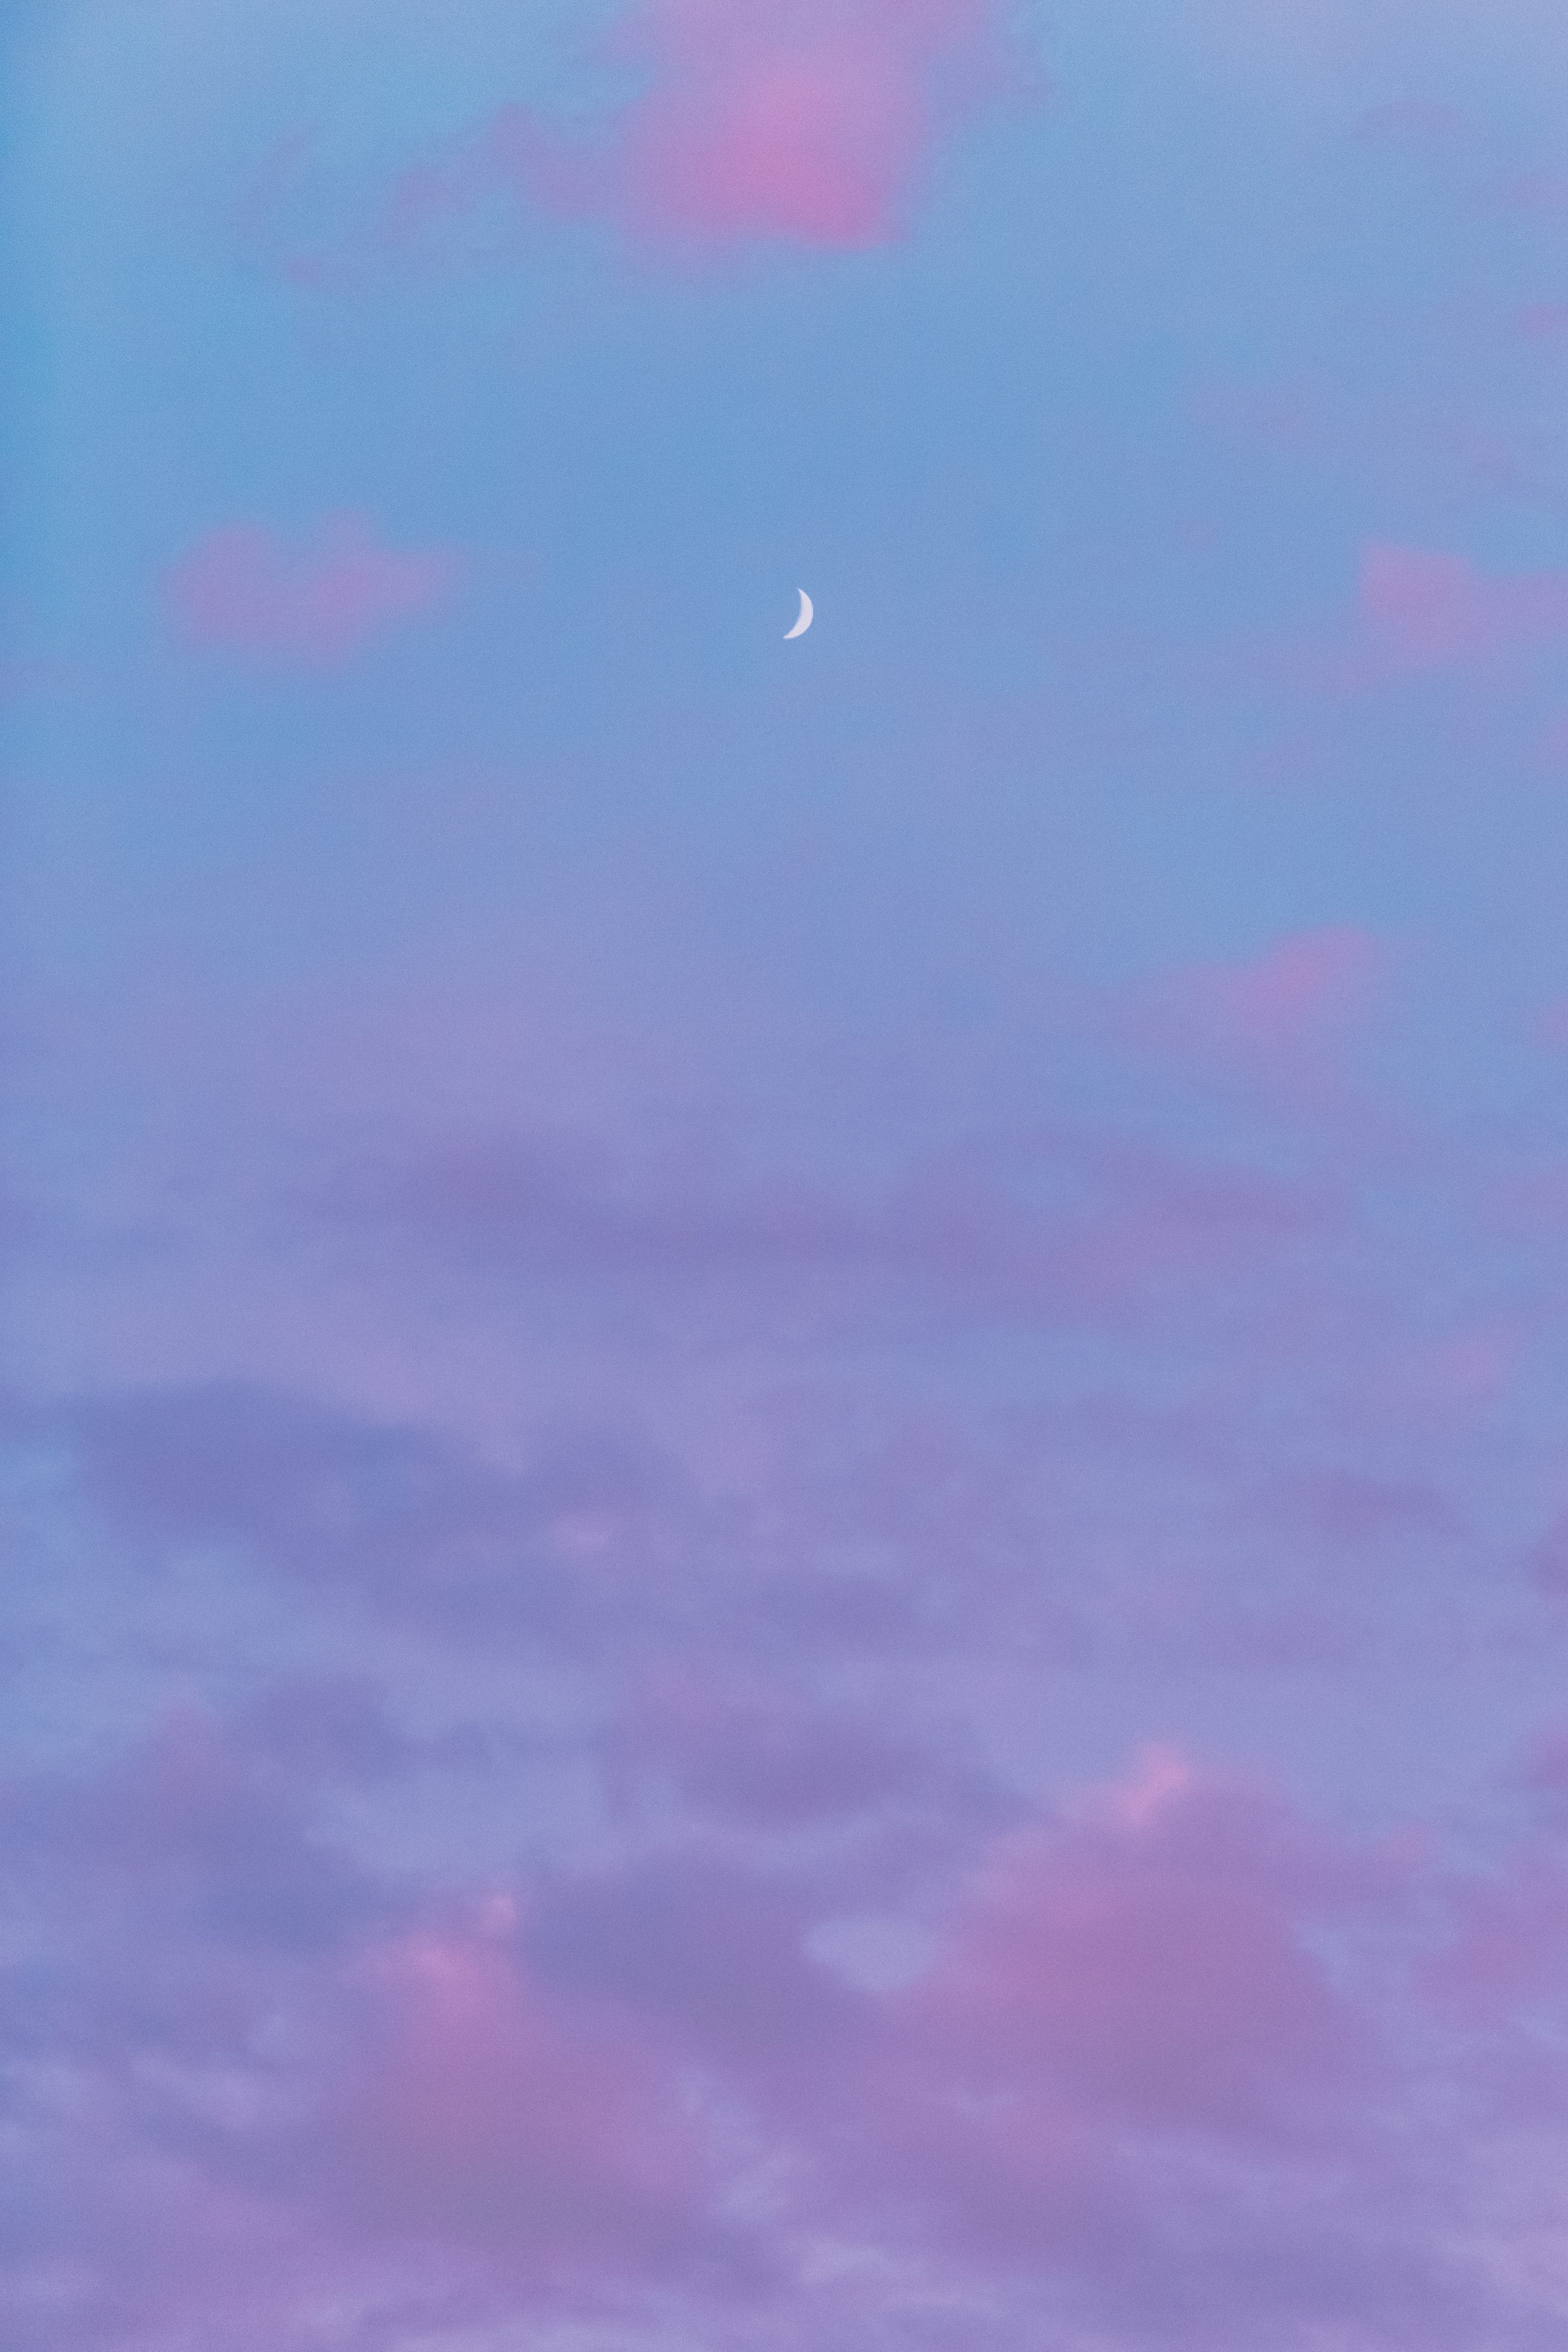 clouds, moon, minimalism, nature home screen for smartphone